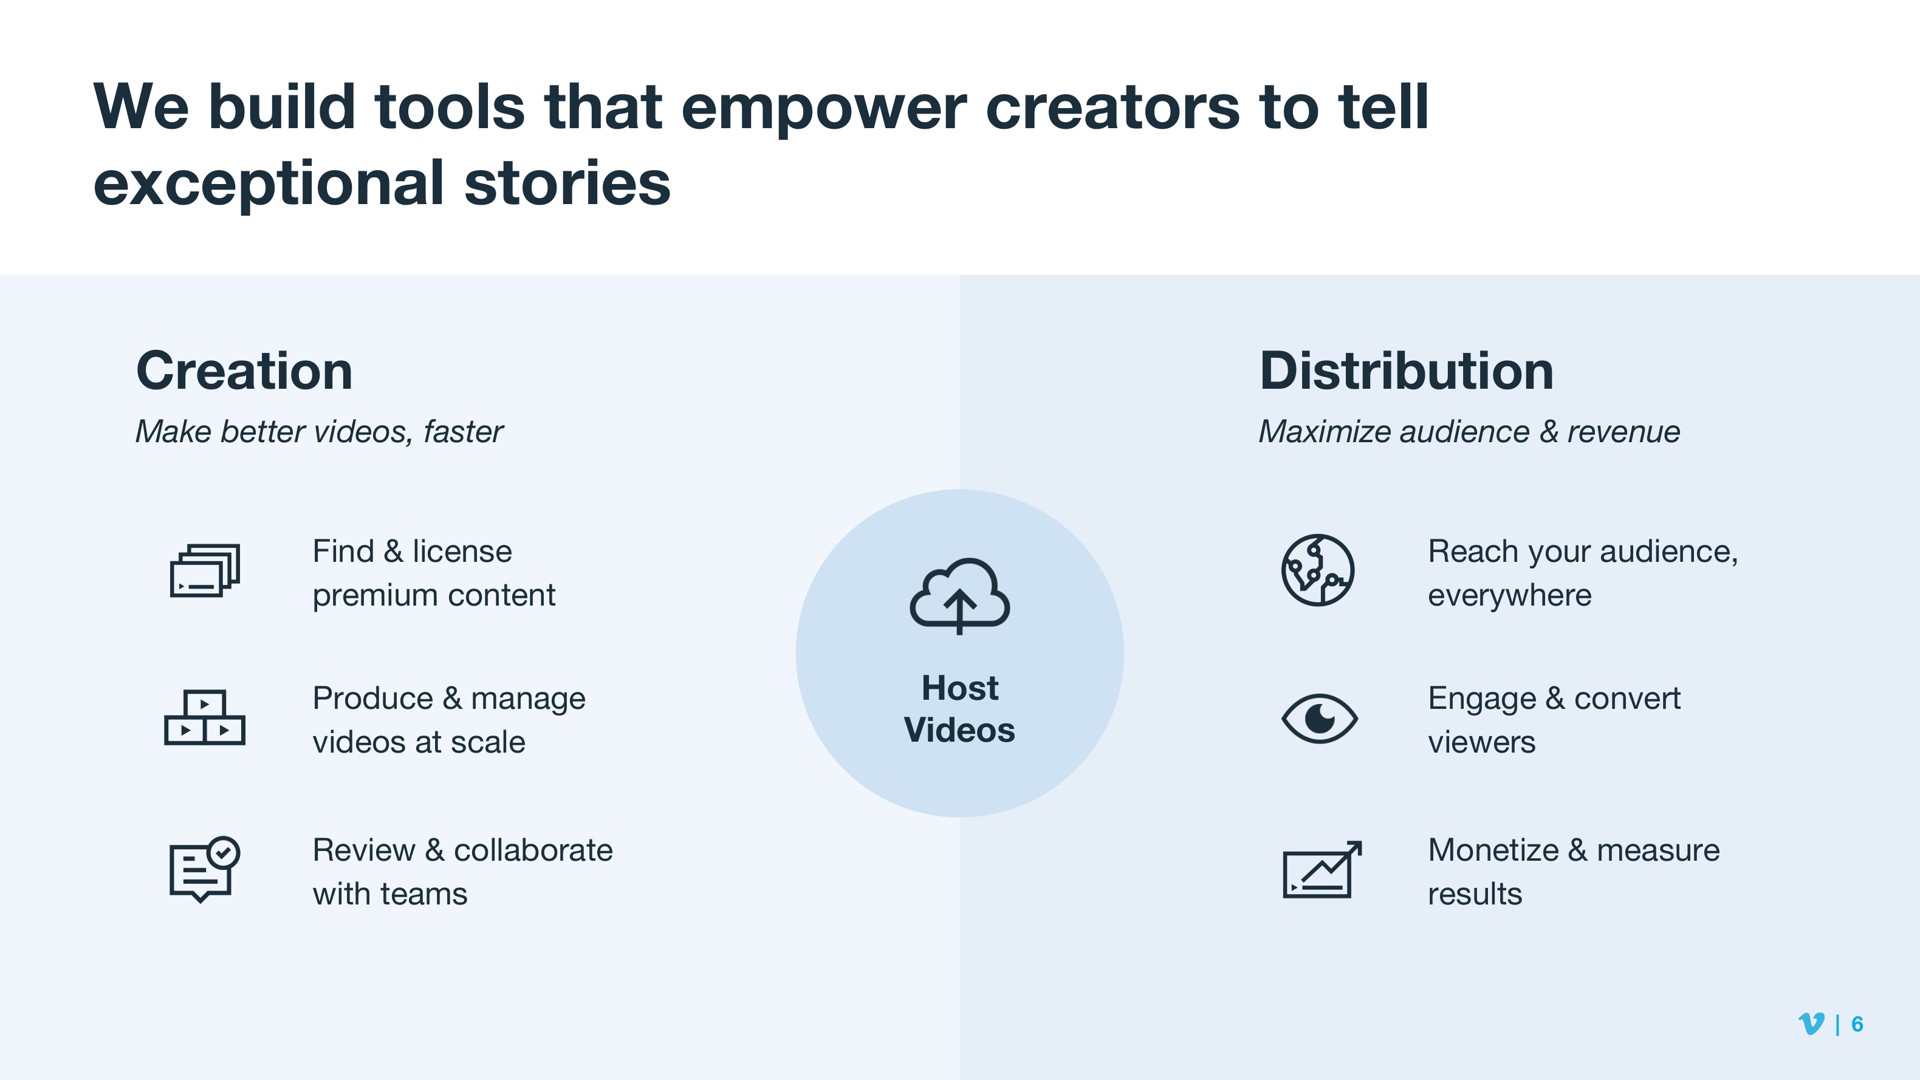 we build tools that empower creators to tell exceptional stories | Vimeo